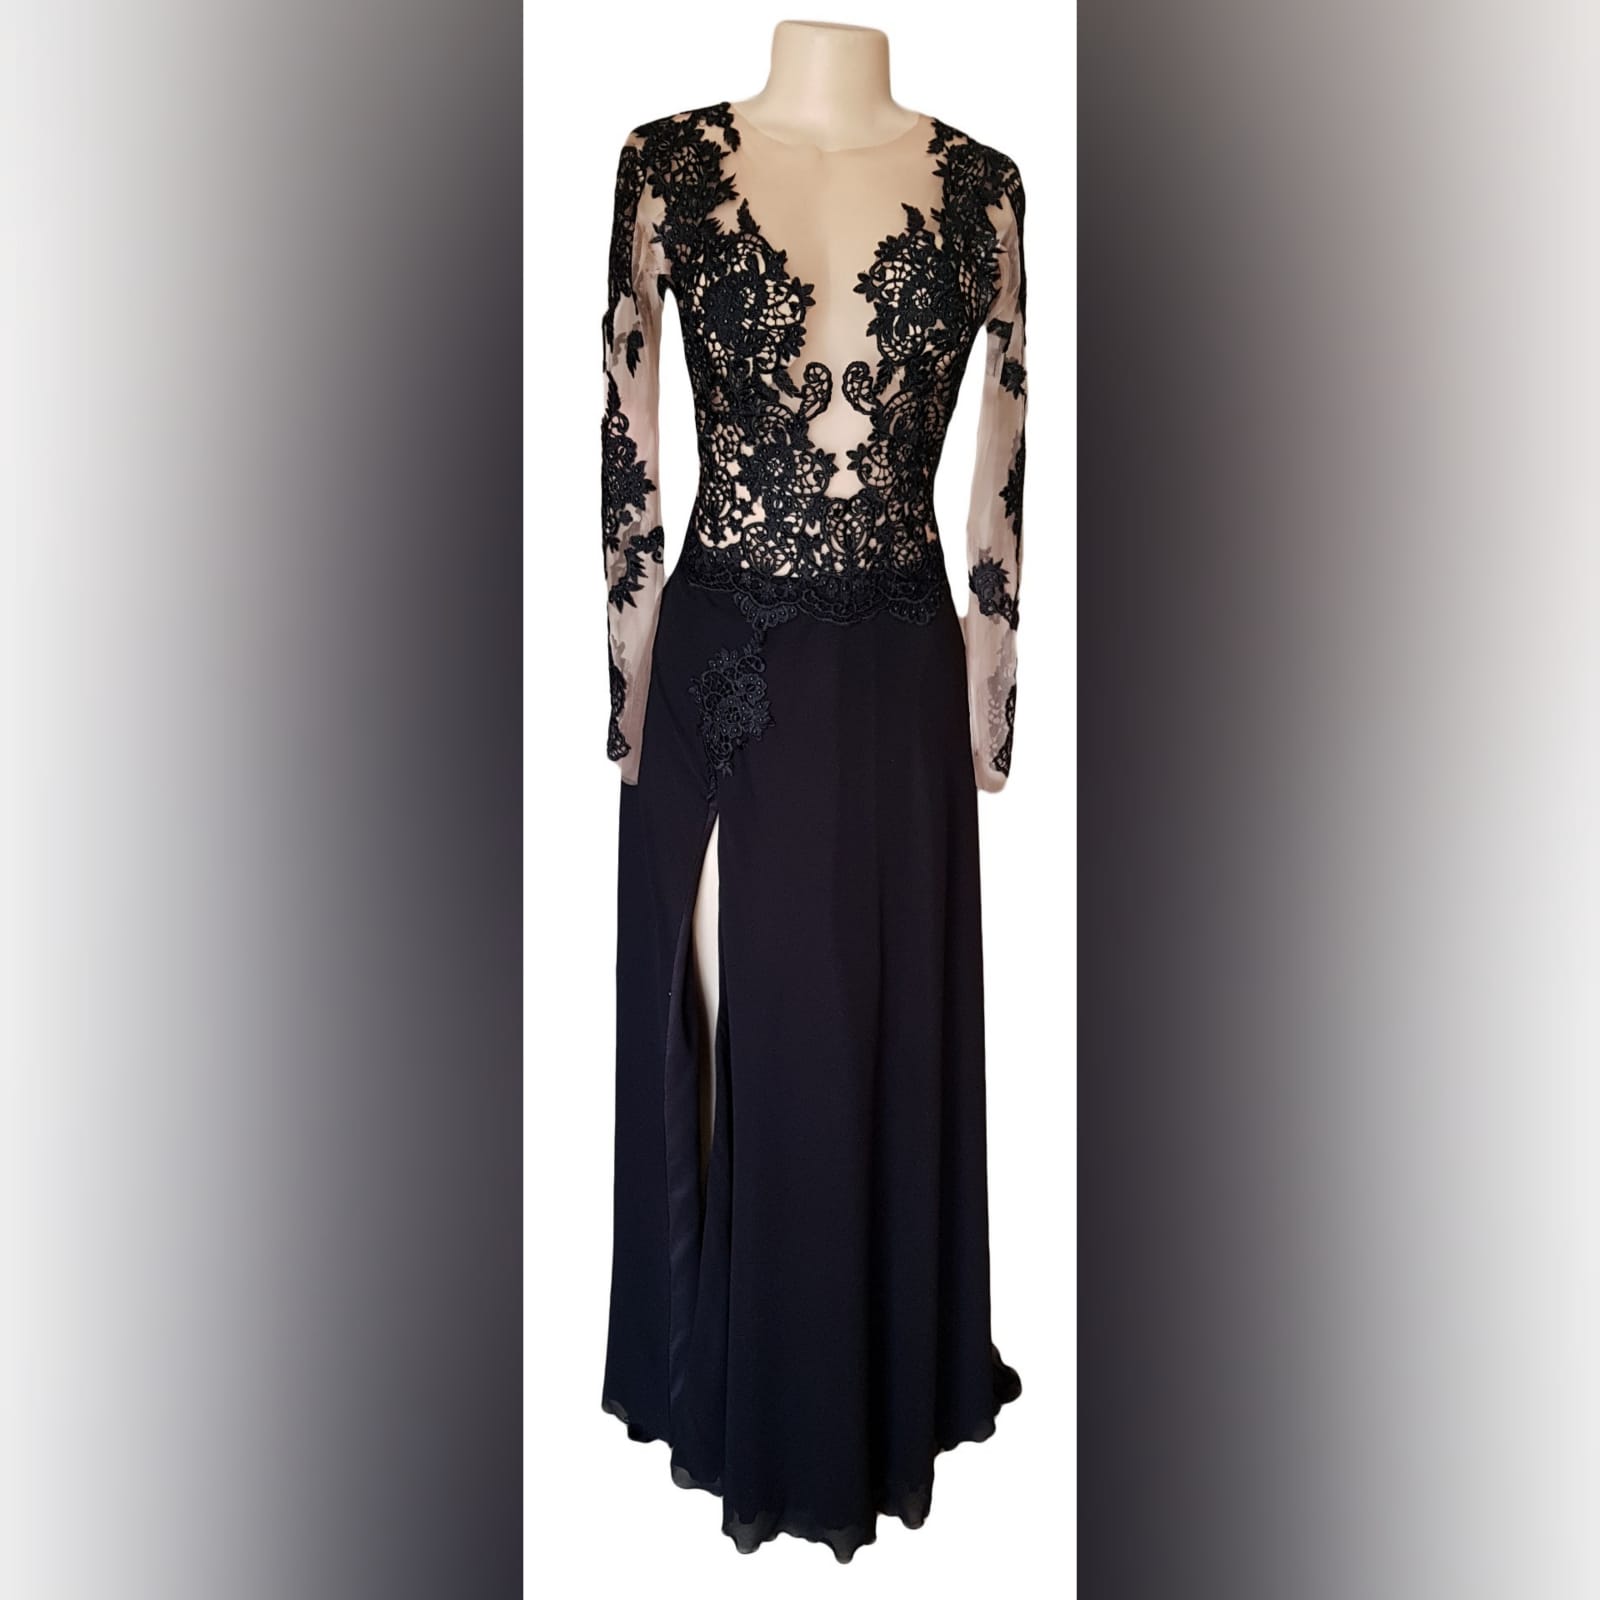 Black lace long flowy prom dress 2 black lace long flowy prom dress with an illusion plunging neckline, long illusion lace sleeves, v open back with a train and a slit.